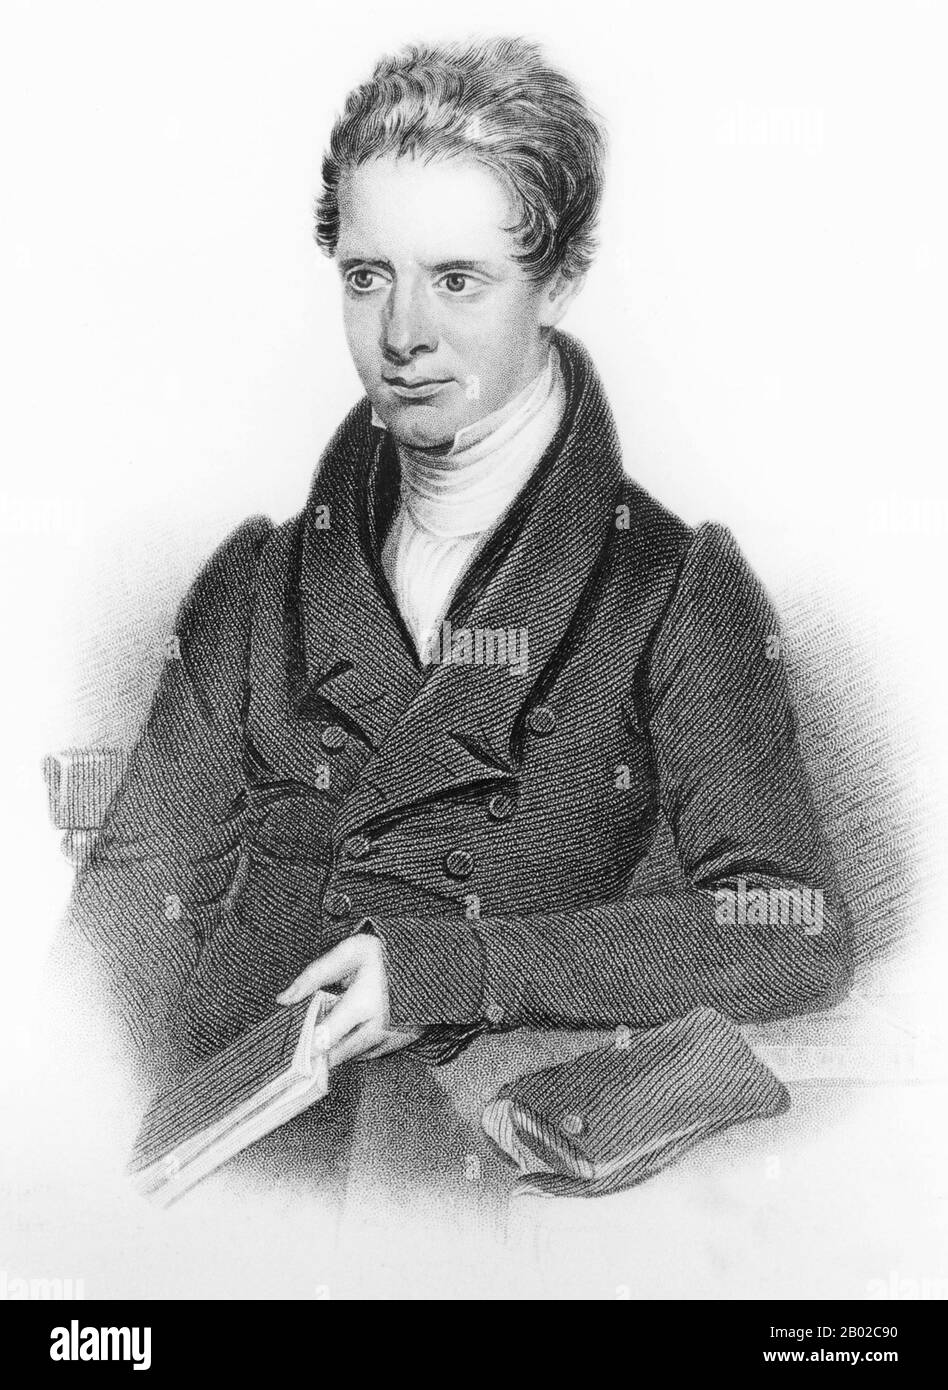 Samuel Dyer (20 February 1804 – 24 October 1843), arrived in Penang in 1827 and with his wife Maria, lived there until 1835. He and his family then moved to Malacca leaving for Singapore in 1842.  He was known as a typographer for creating a steel typeface of Chinese characters for printing to replace traditional wood blocks. Dyer's type was accurate, aesthetically pleasing, durable and practical. Stock Photo